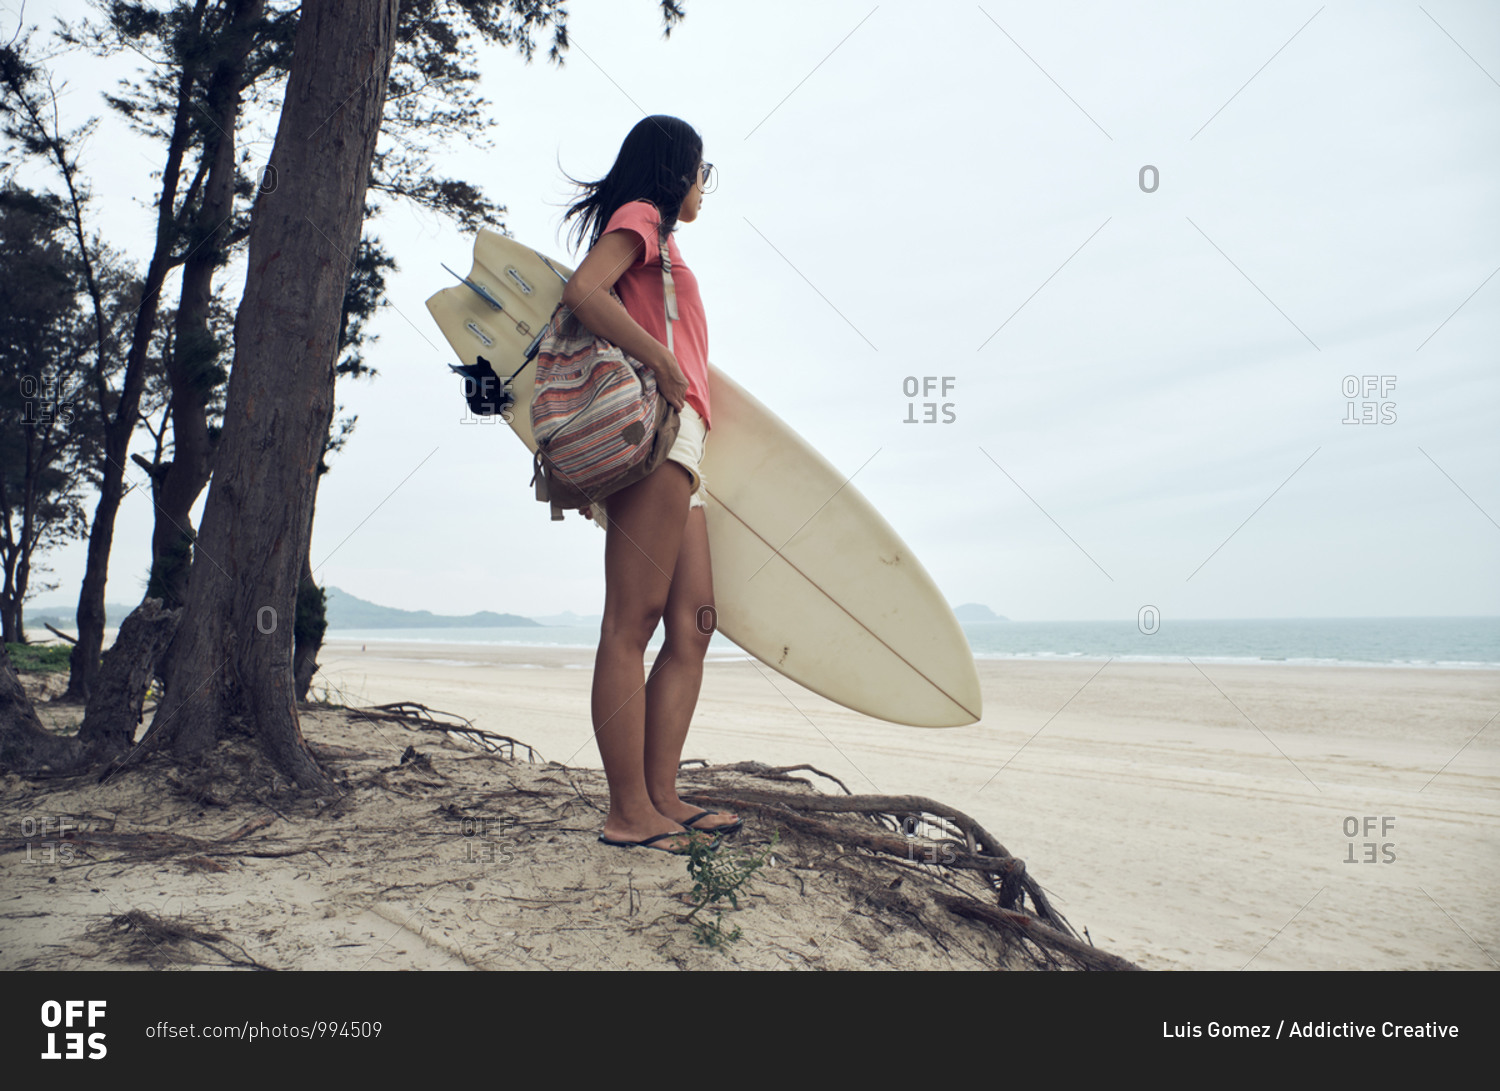 Side view of young Asian female surfer in summer outfit walking on sandy beach and carrying surfboard against calm blue sea looking away